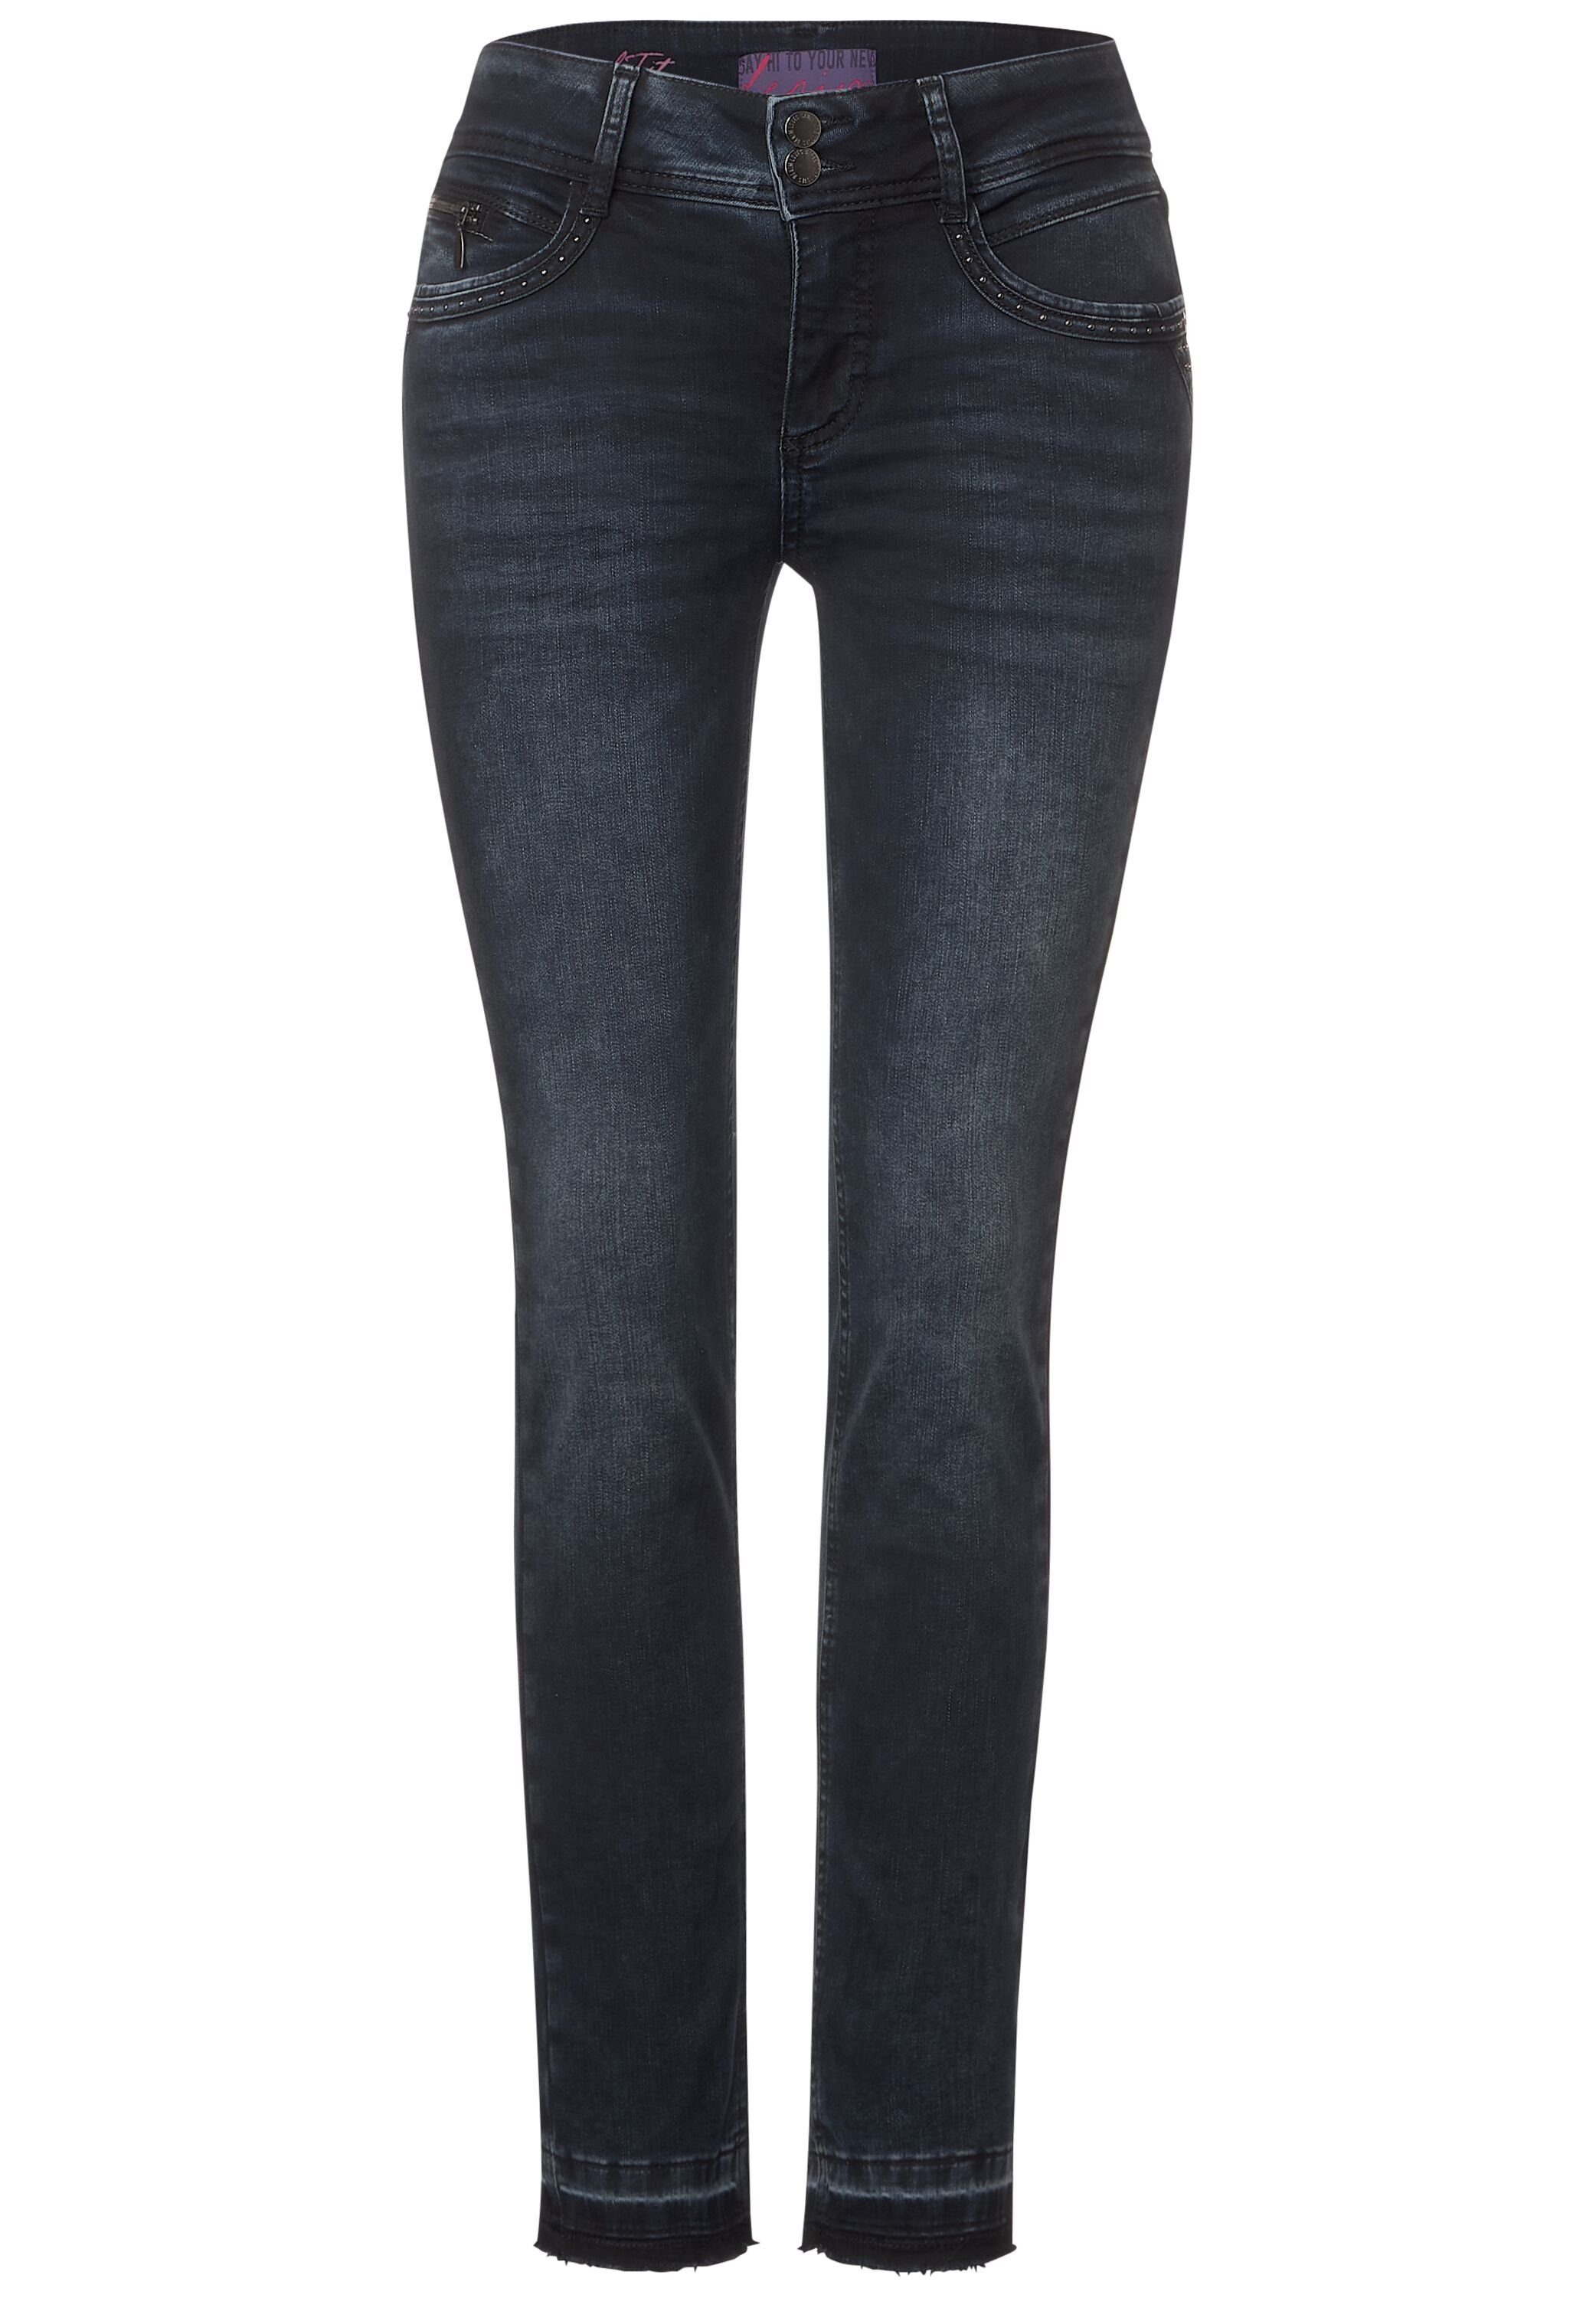 STREET Middle Waist ONE Gerade Jeans